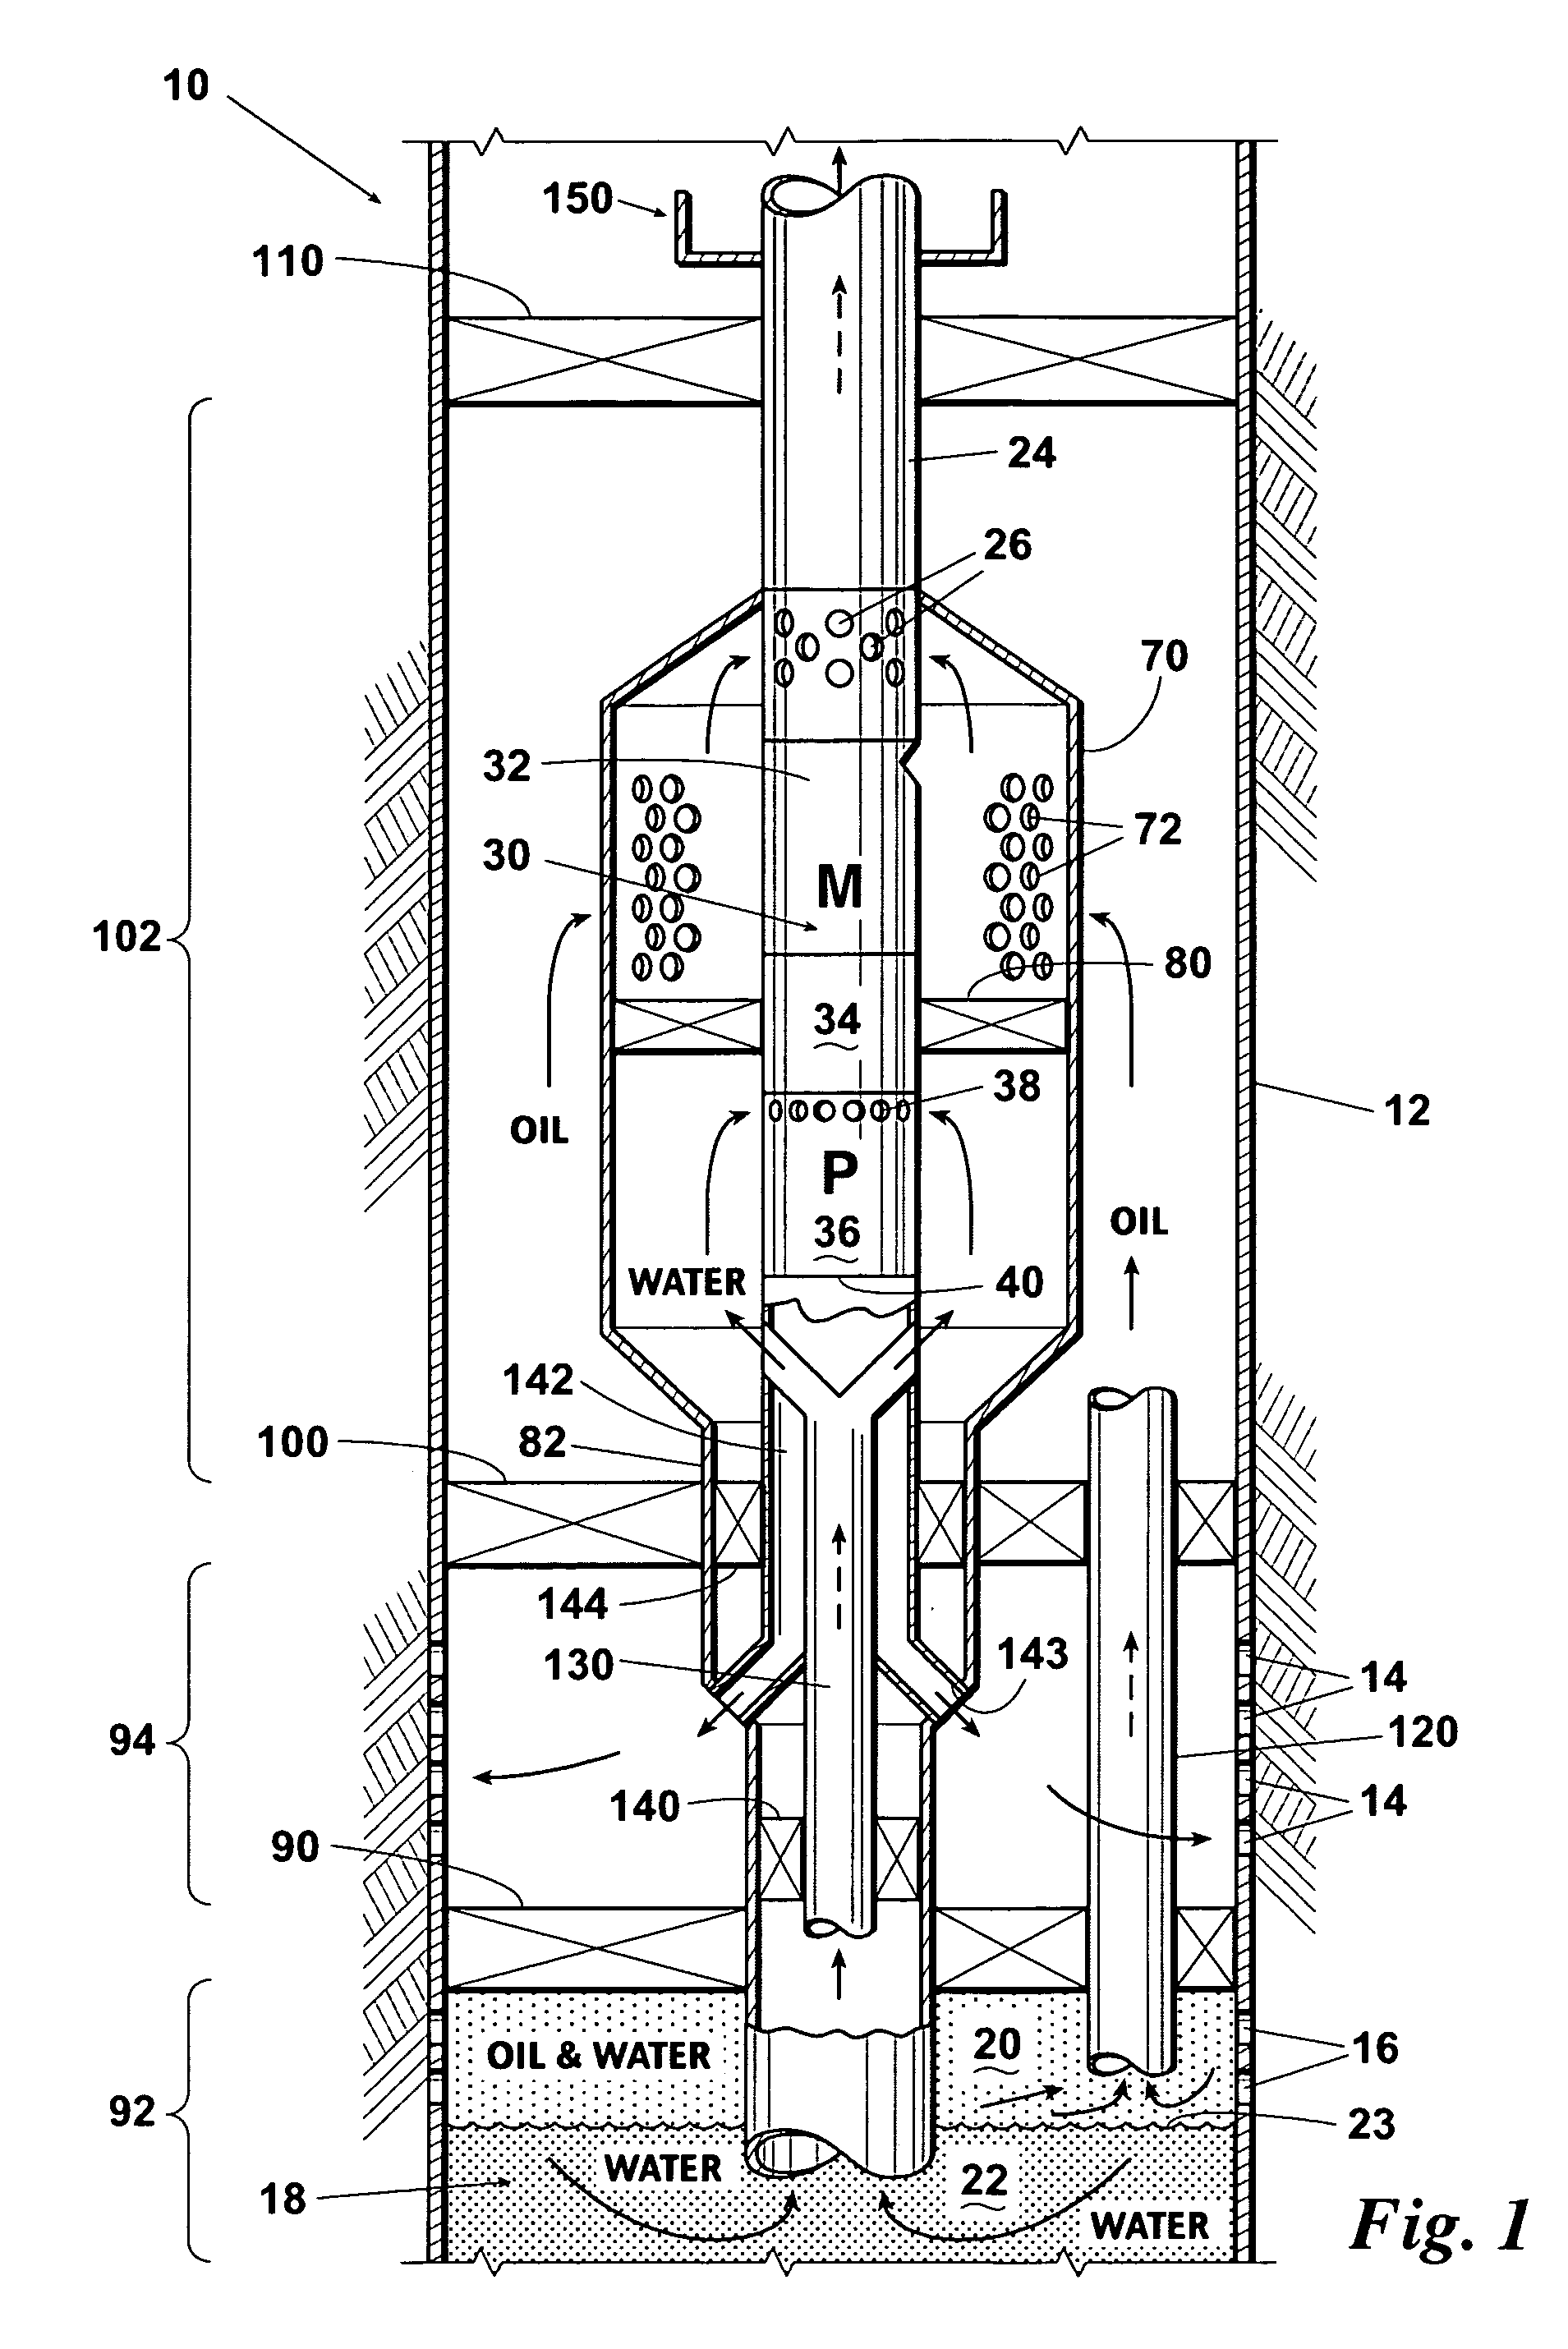 Inverted electrical submersible pump completion to maintain fluid segregation and ensure motor cooling in dual-stream well